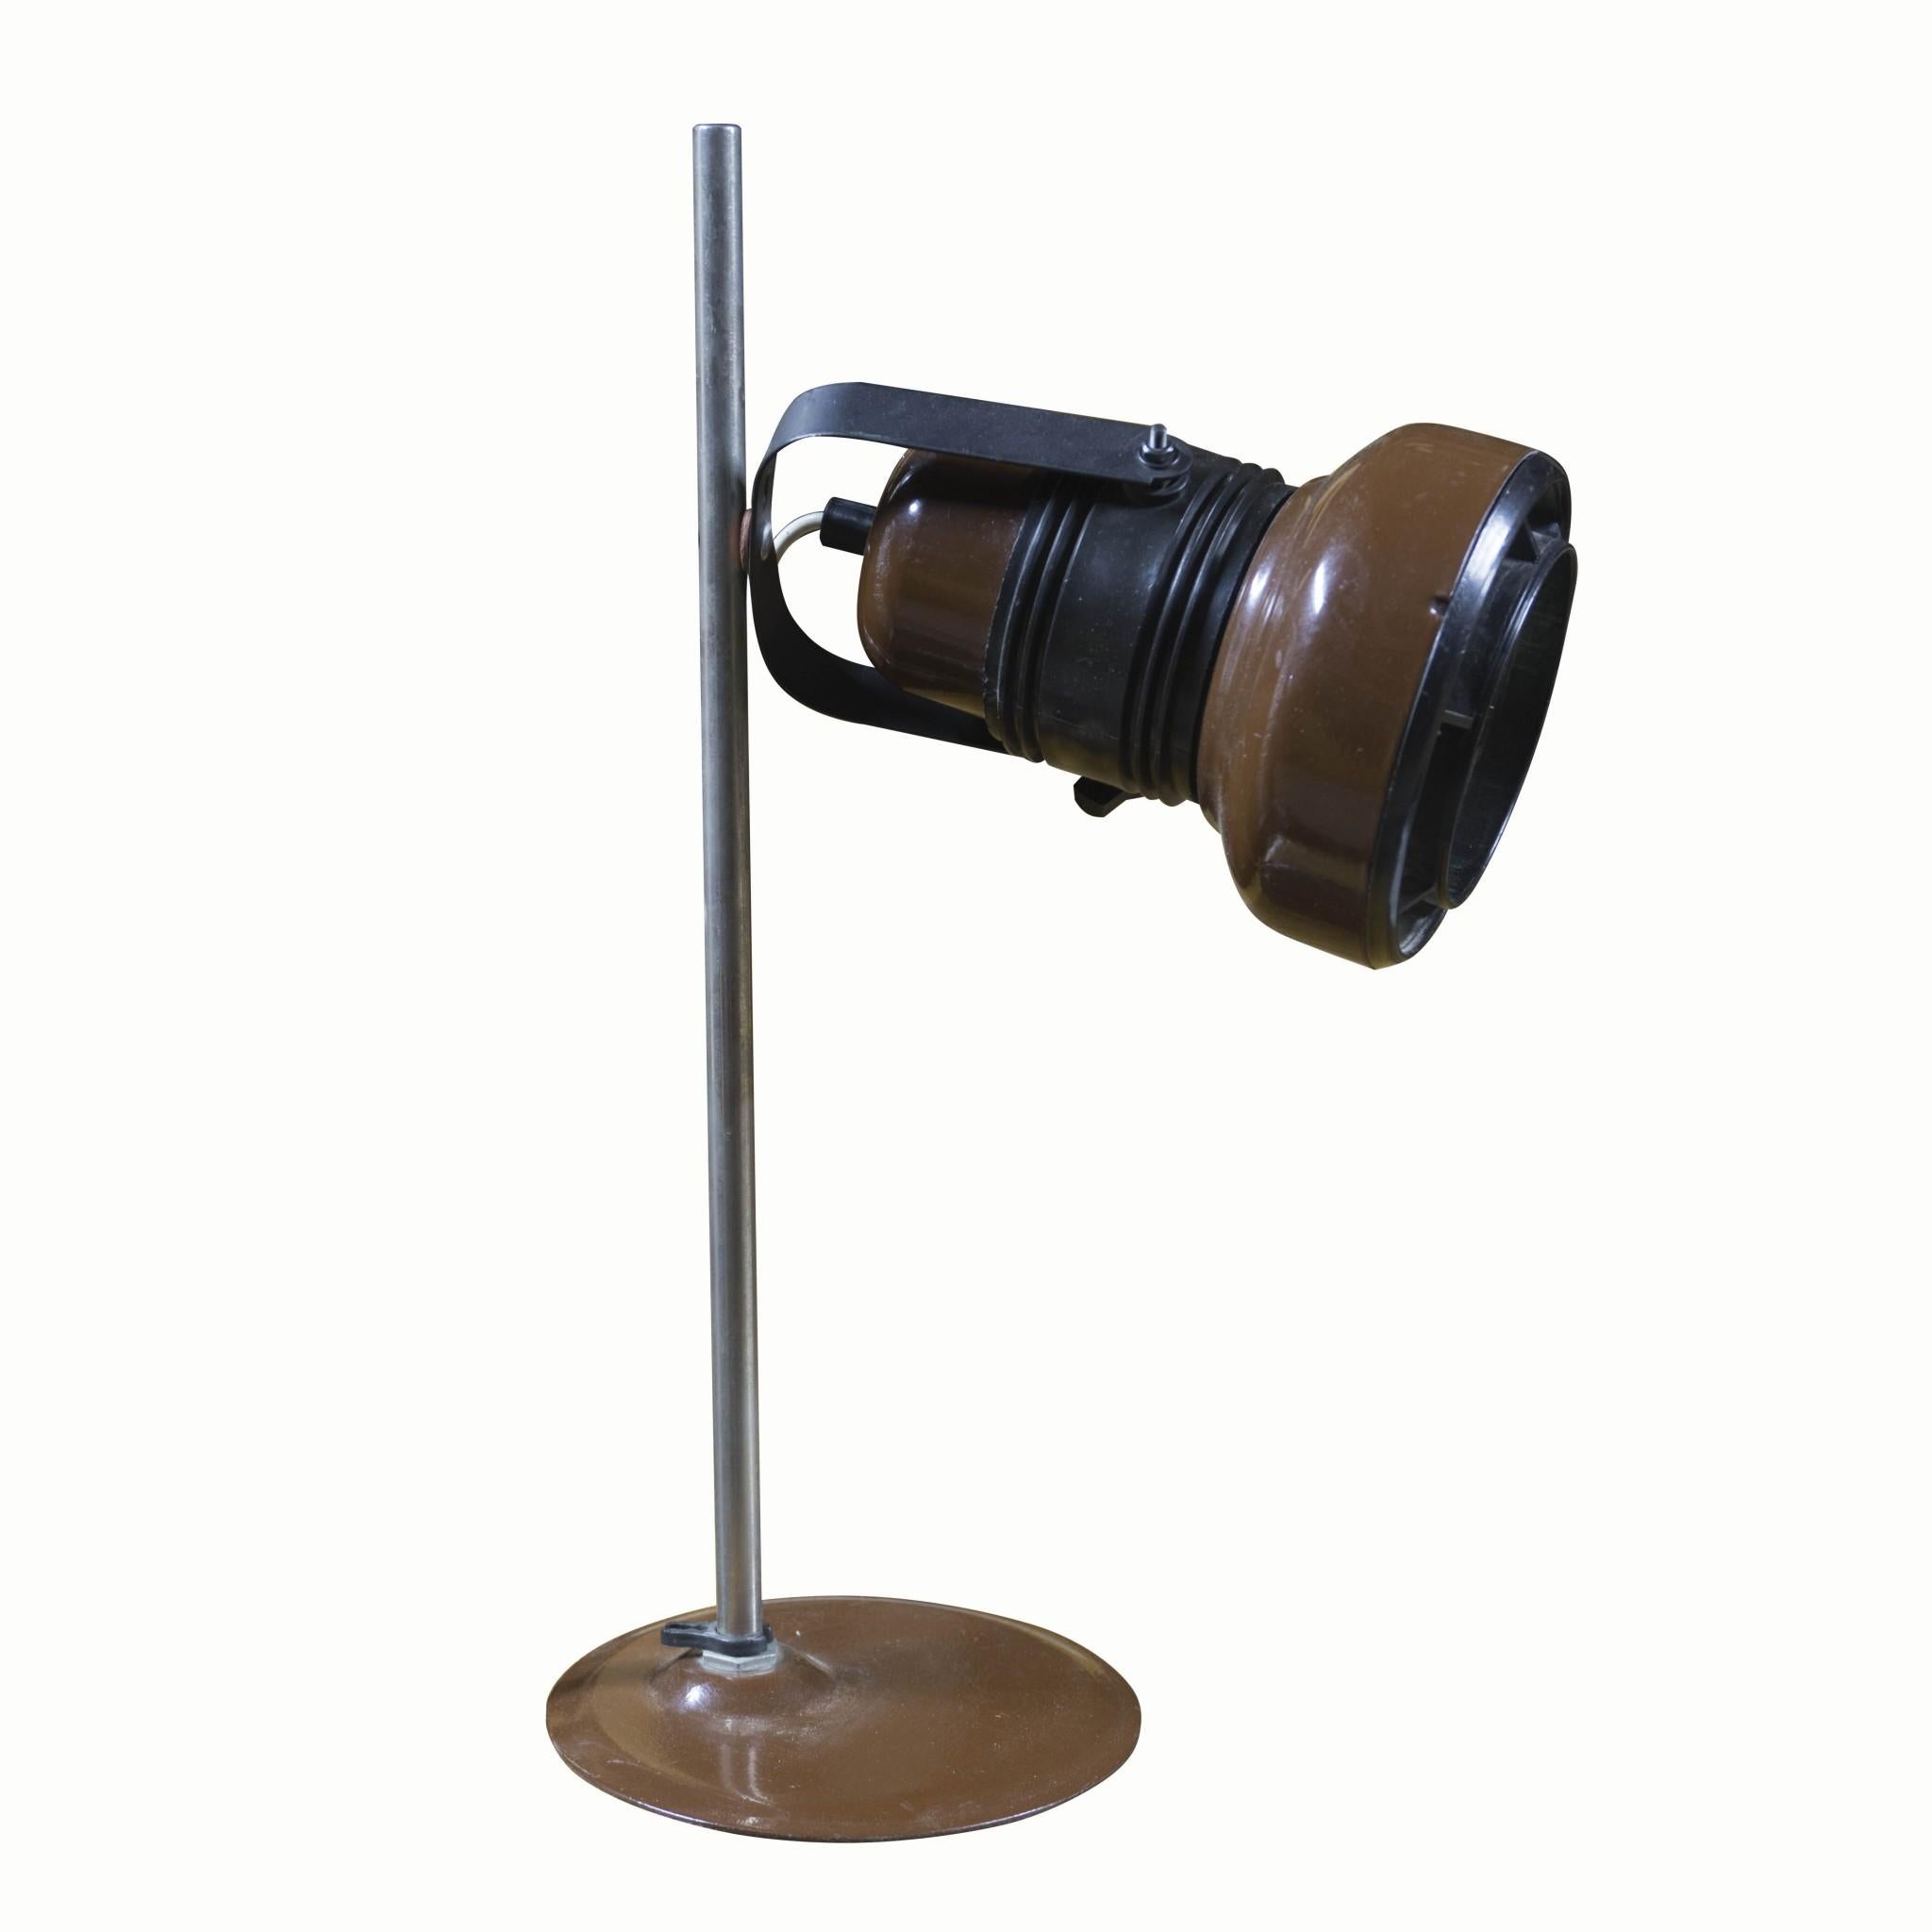 This mid century lamp impresses with its space-age design. It was made in Hungary in the 1960´s. The lampshade can be positioned up and down. The lamp is in good vintage condition, showing signs of age and use. Material: metal, plastic. Fully